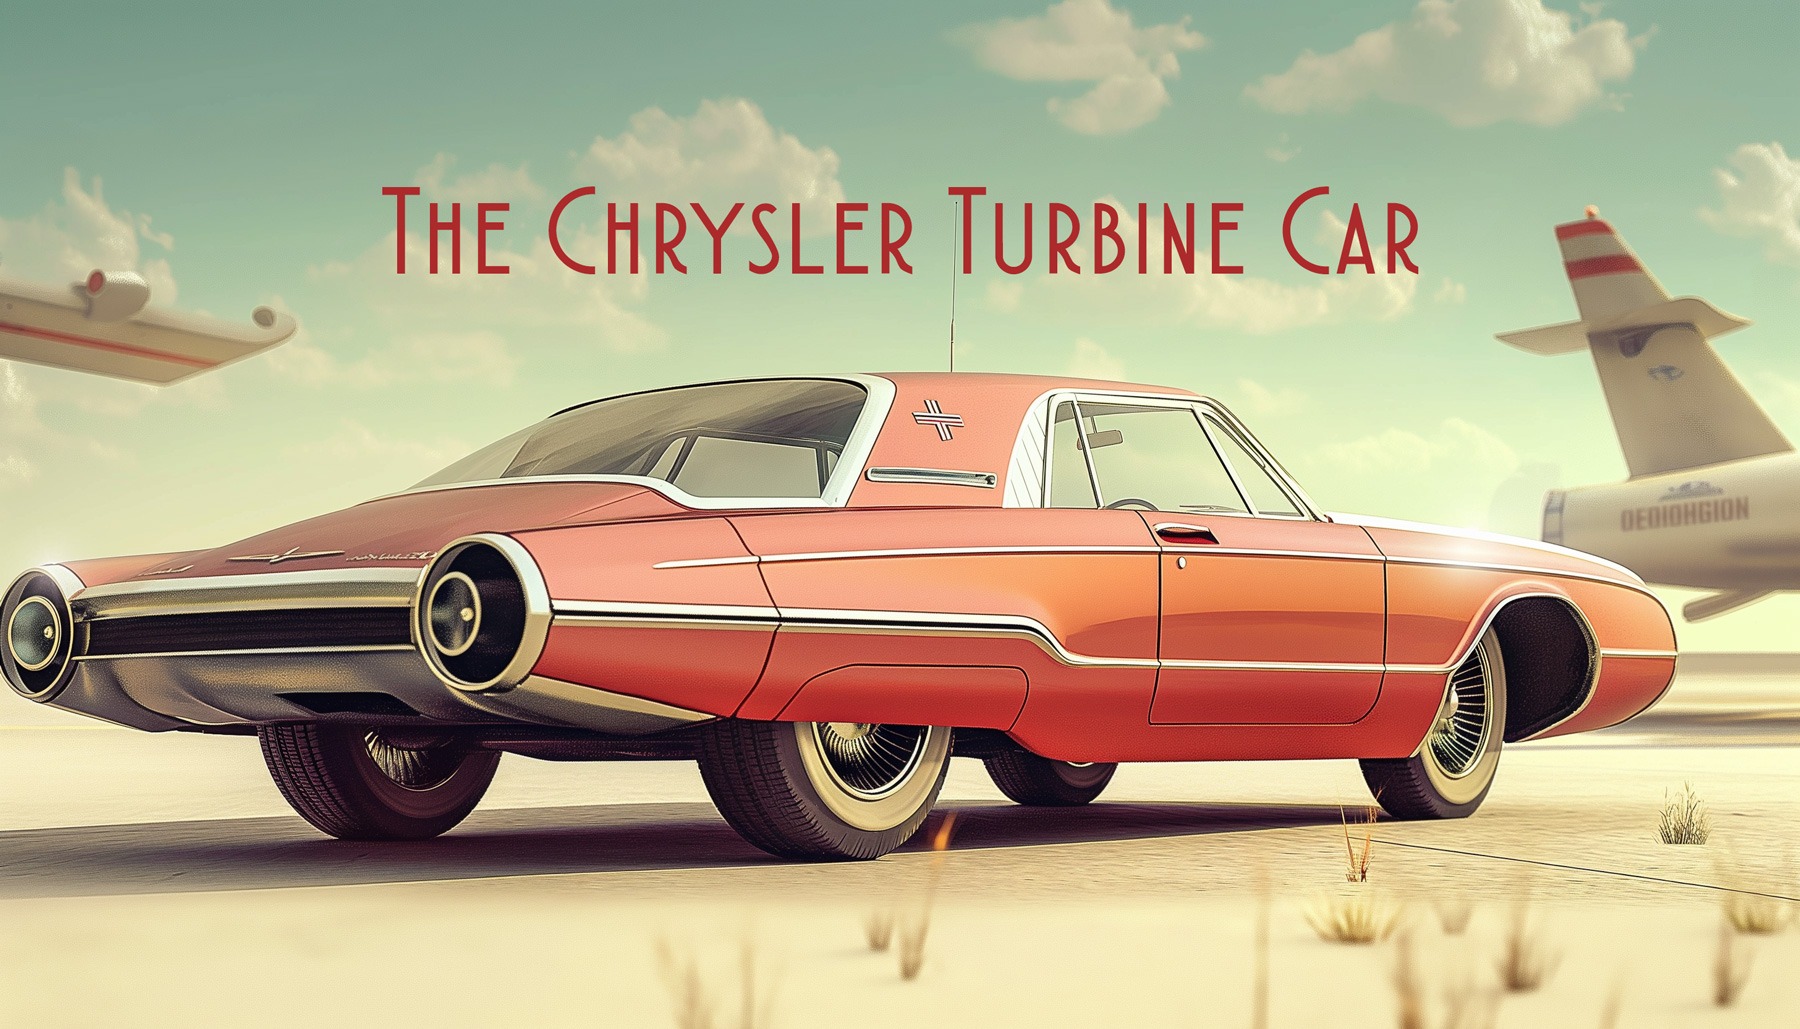 Automobiles you don't see everyday... - Page 12 Chrysler-turbine-car-banner